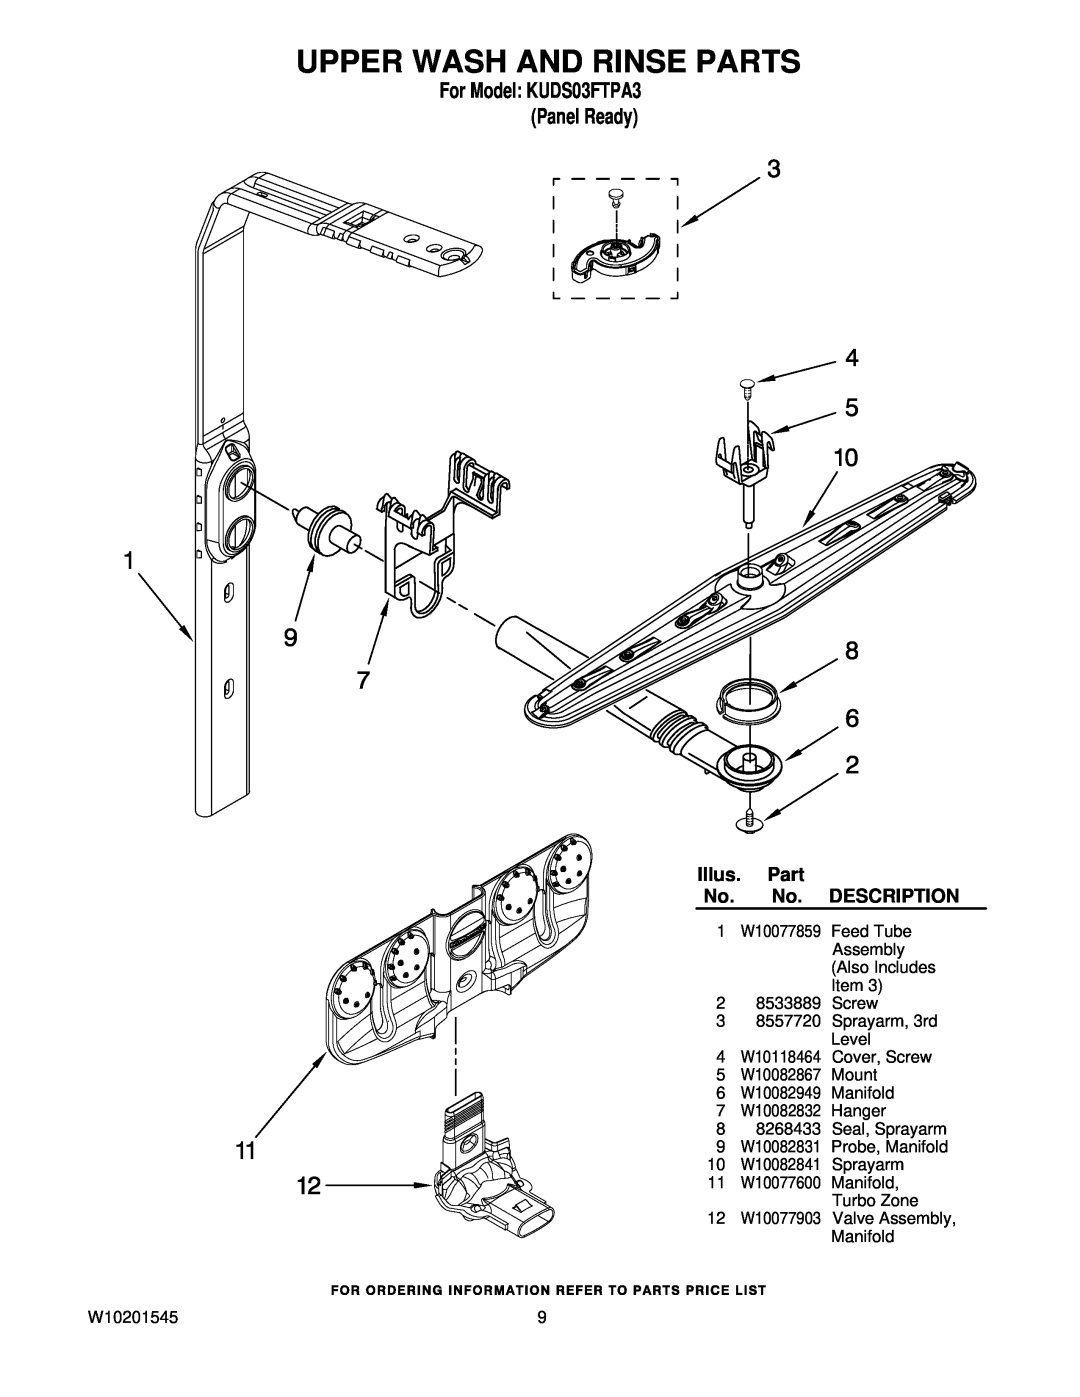 KitchenAid manual Upper Wash And Rinse Parts, For Model KUDS03FTPA3 Panel Ready, Illus. Part, Description, W10077859 